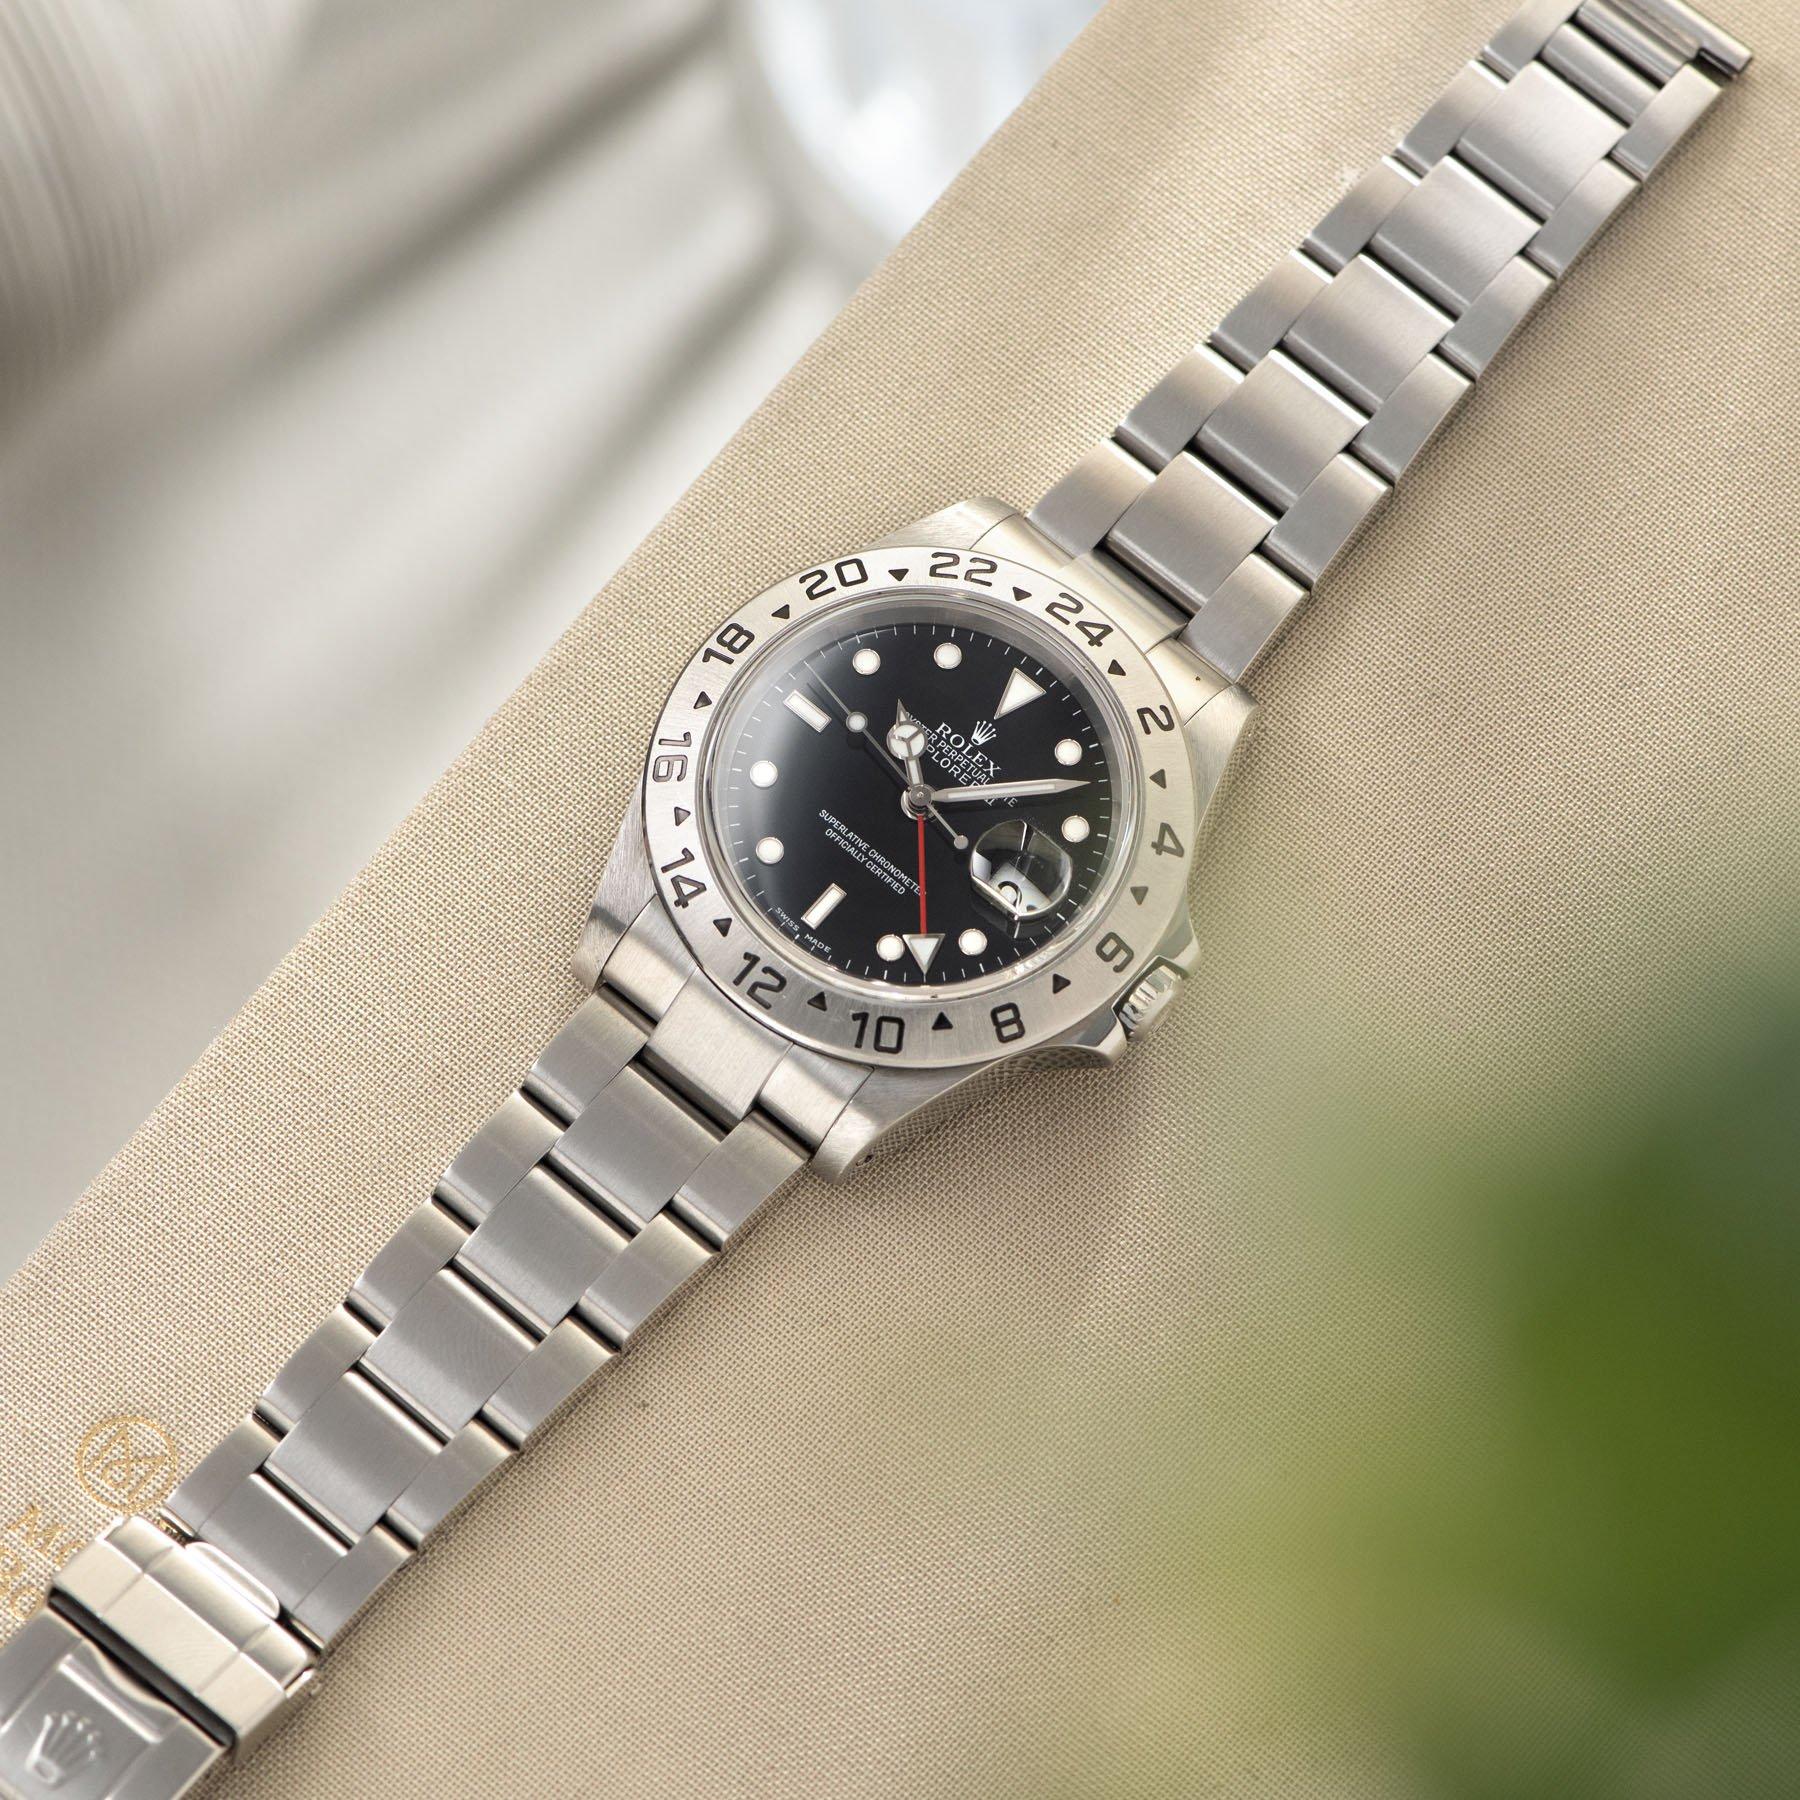 Rolex Explorer 2 Black Dial 16570 Box and Papers